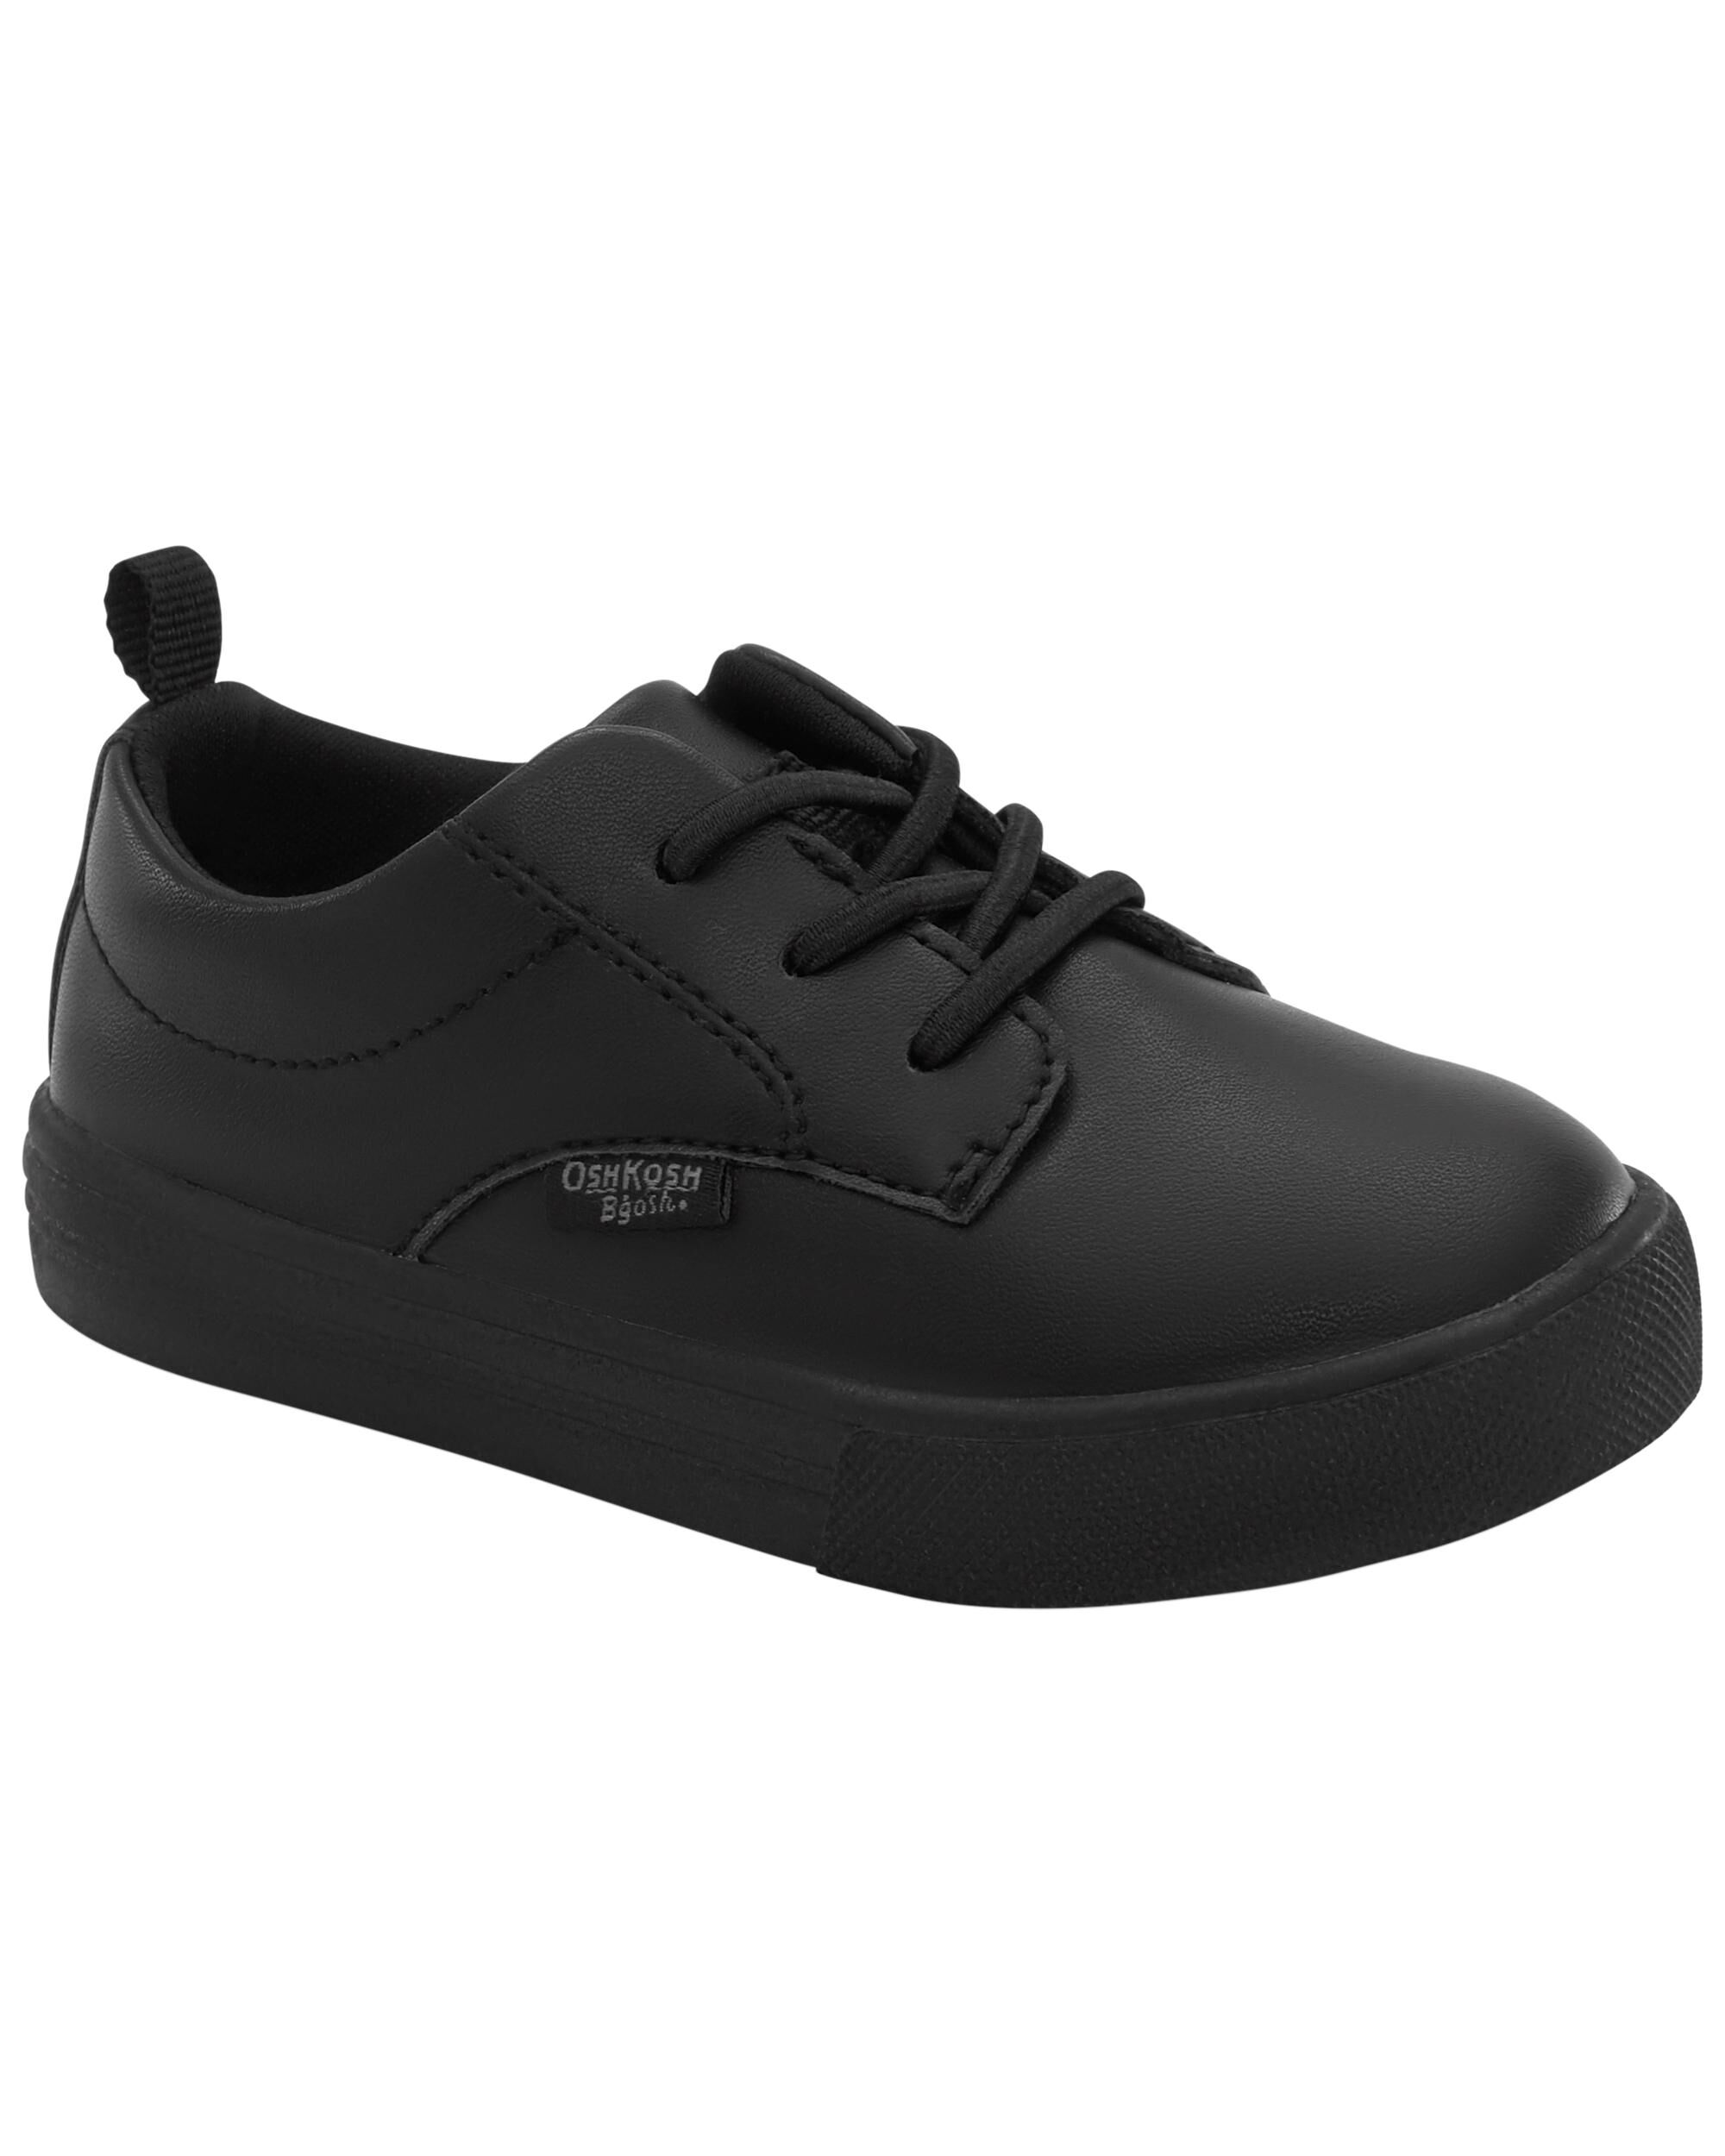 Black Velcro Shoes - Buy Black Velcro Shoes online in India